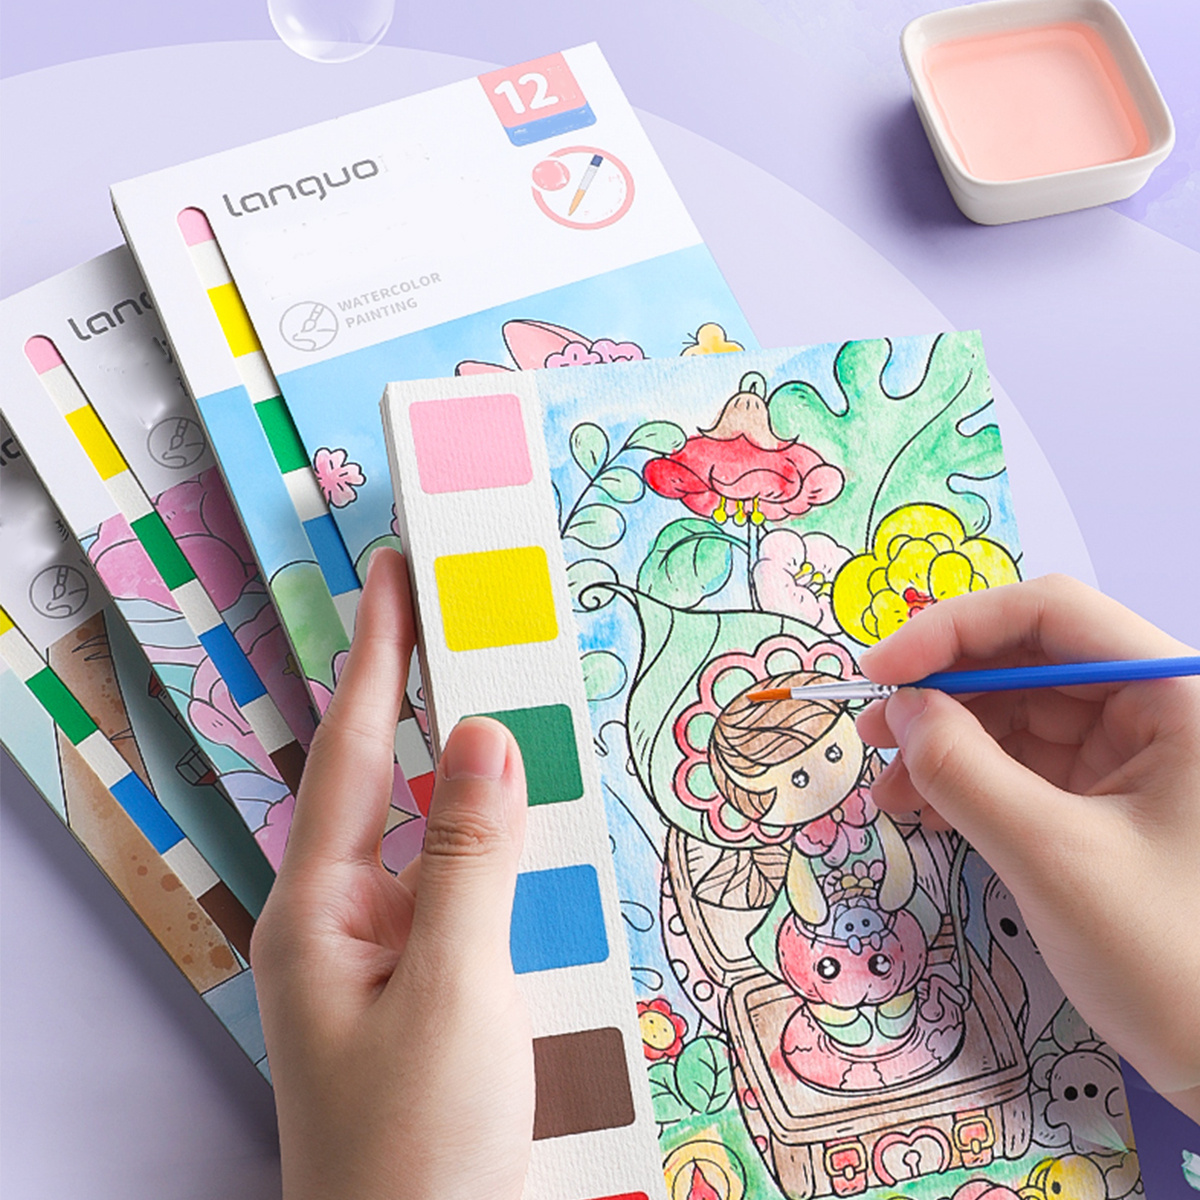 Tohuu Watercolor Book for Kids Instructional Travel Pocket Watercolor Set  Water Painting Book Kids Children's Diy Coloring Gouache Doodle Book  attractively 